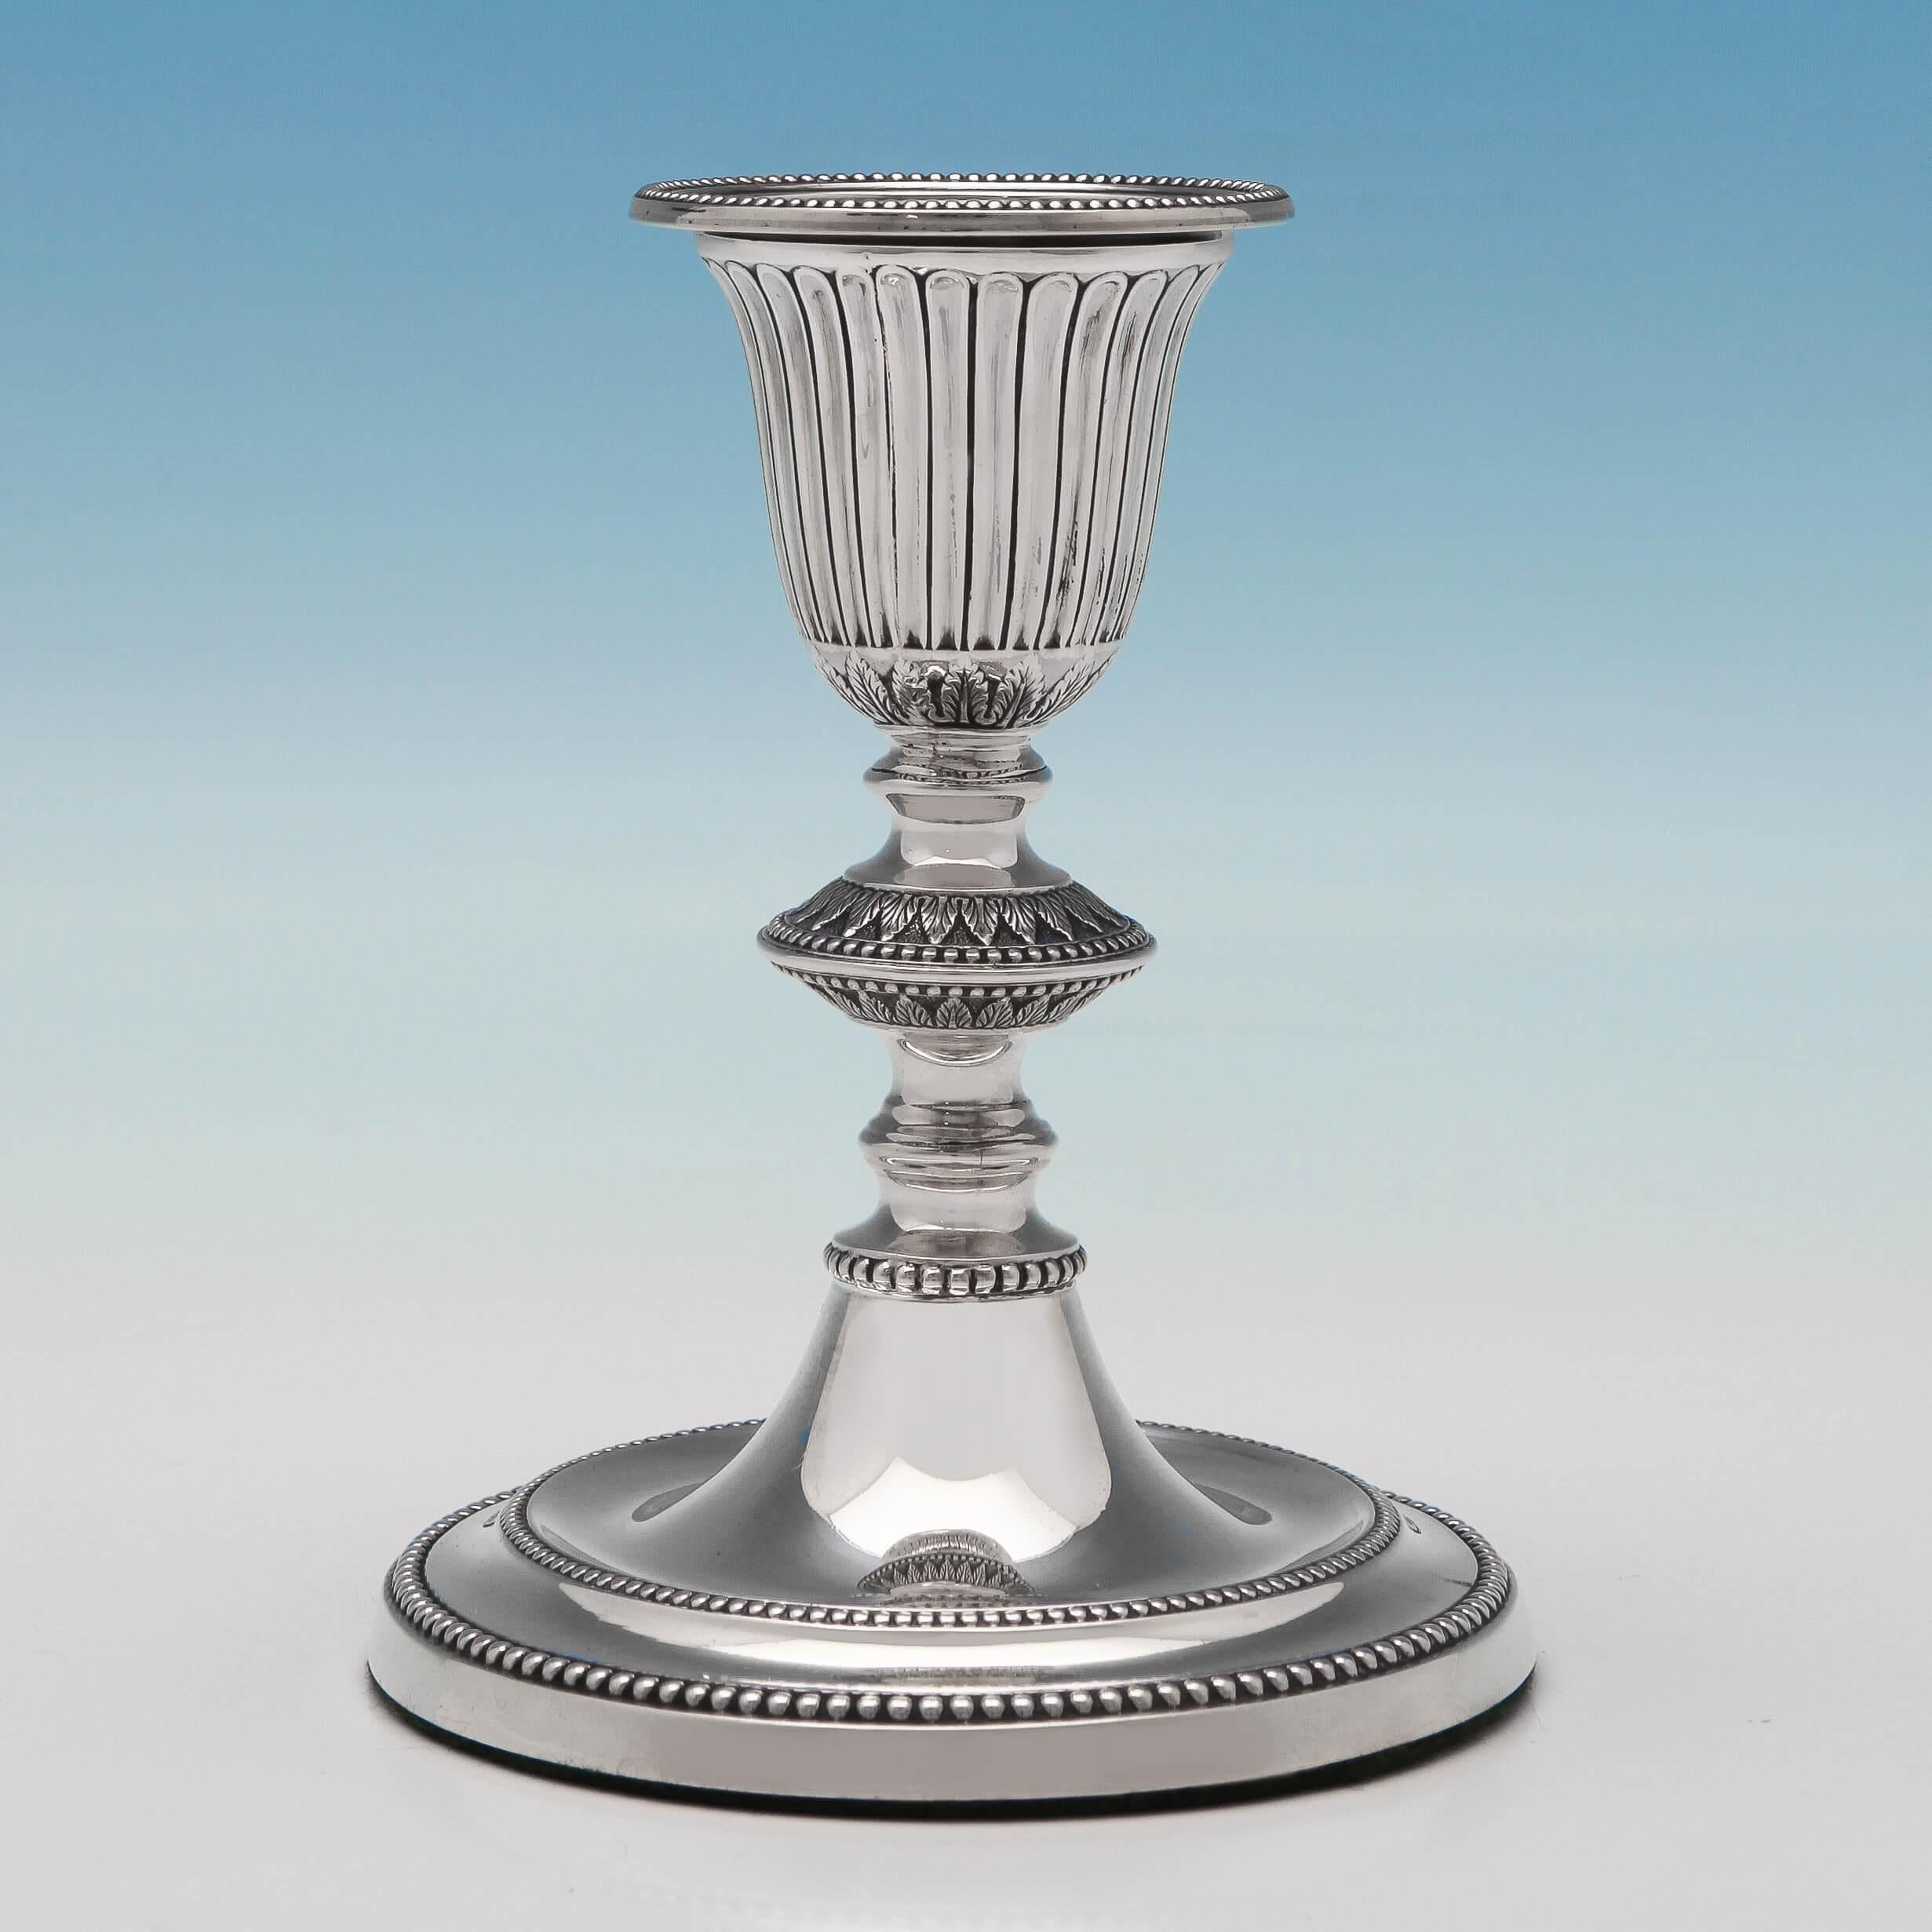 Hallmarked in Sheffield in 1886 by James Kebberling Bembridge, this attractive pair of Victorian antique, sterling silver candlesticks, feature bead borders, fluted decoration, acanthus detailing, and removable sconces. Each candlestick measures